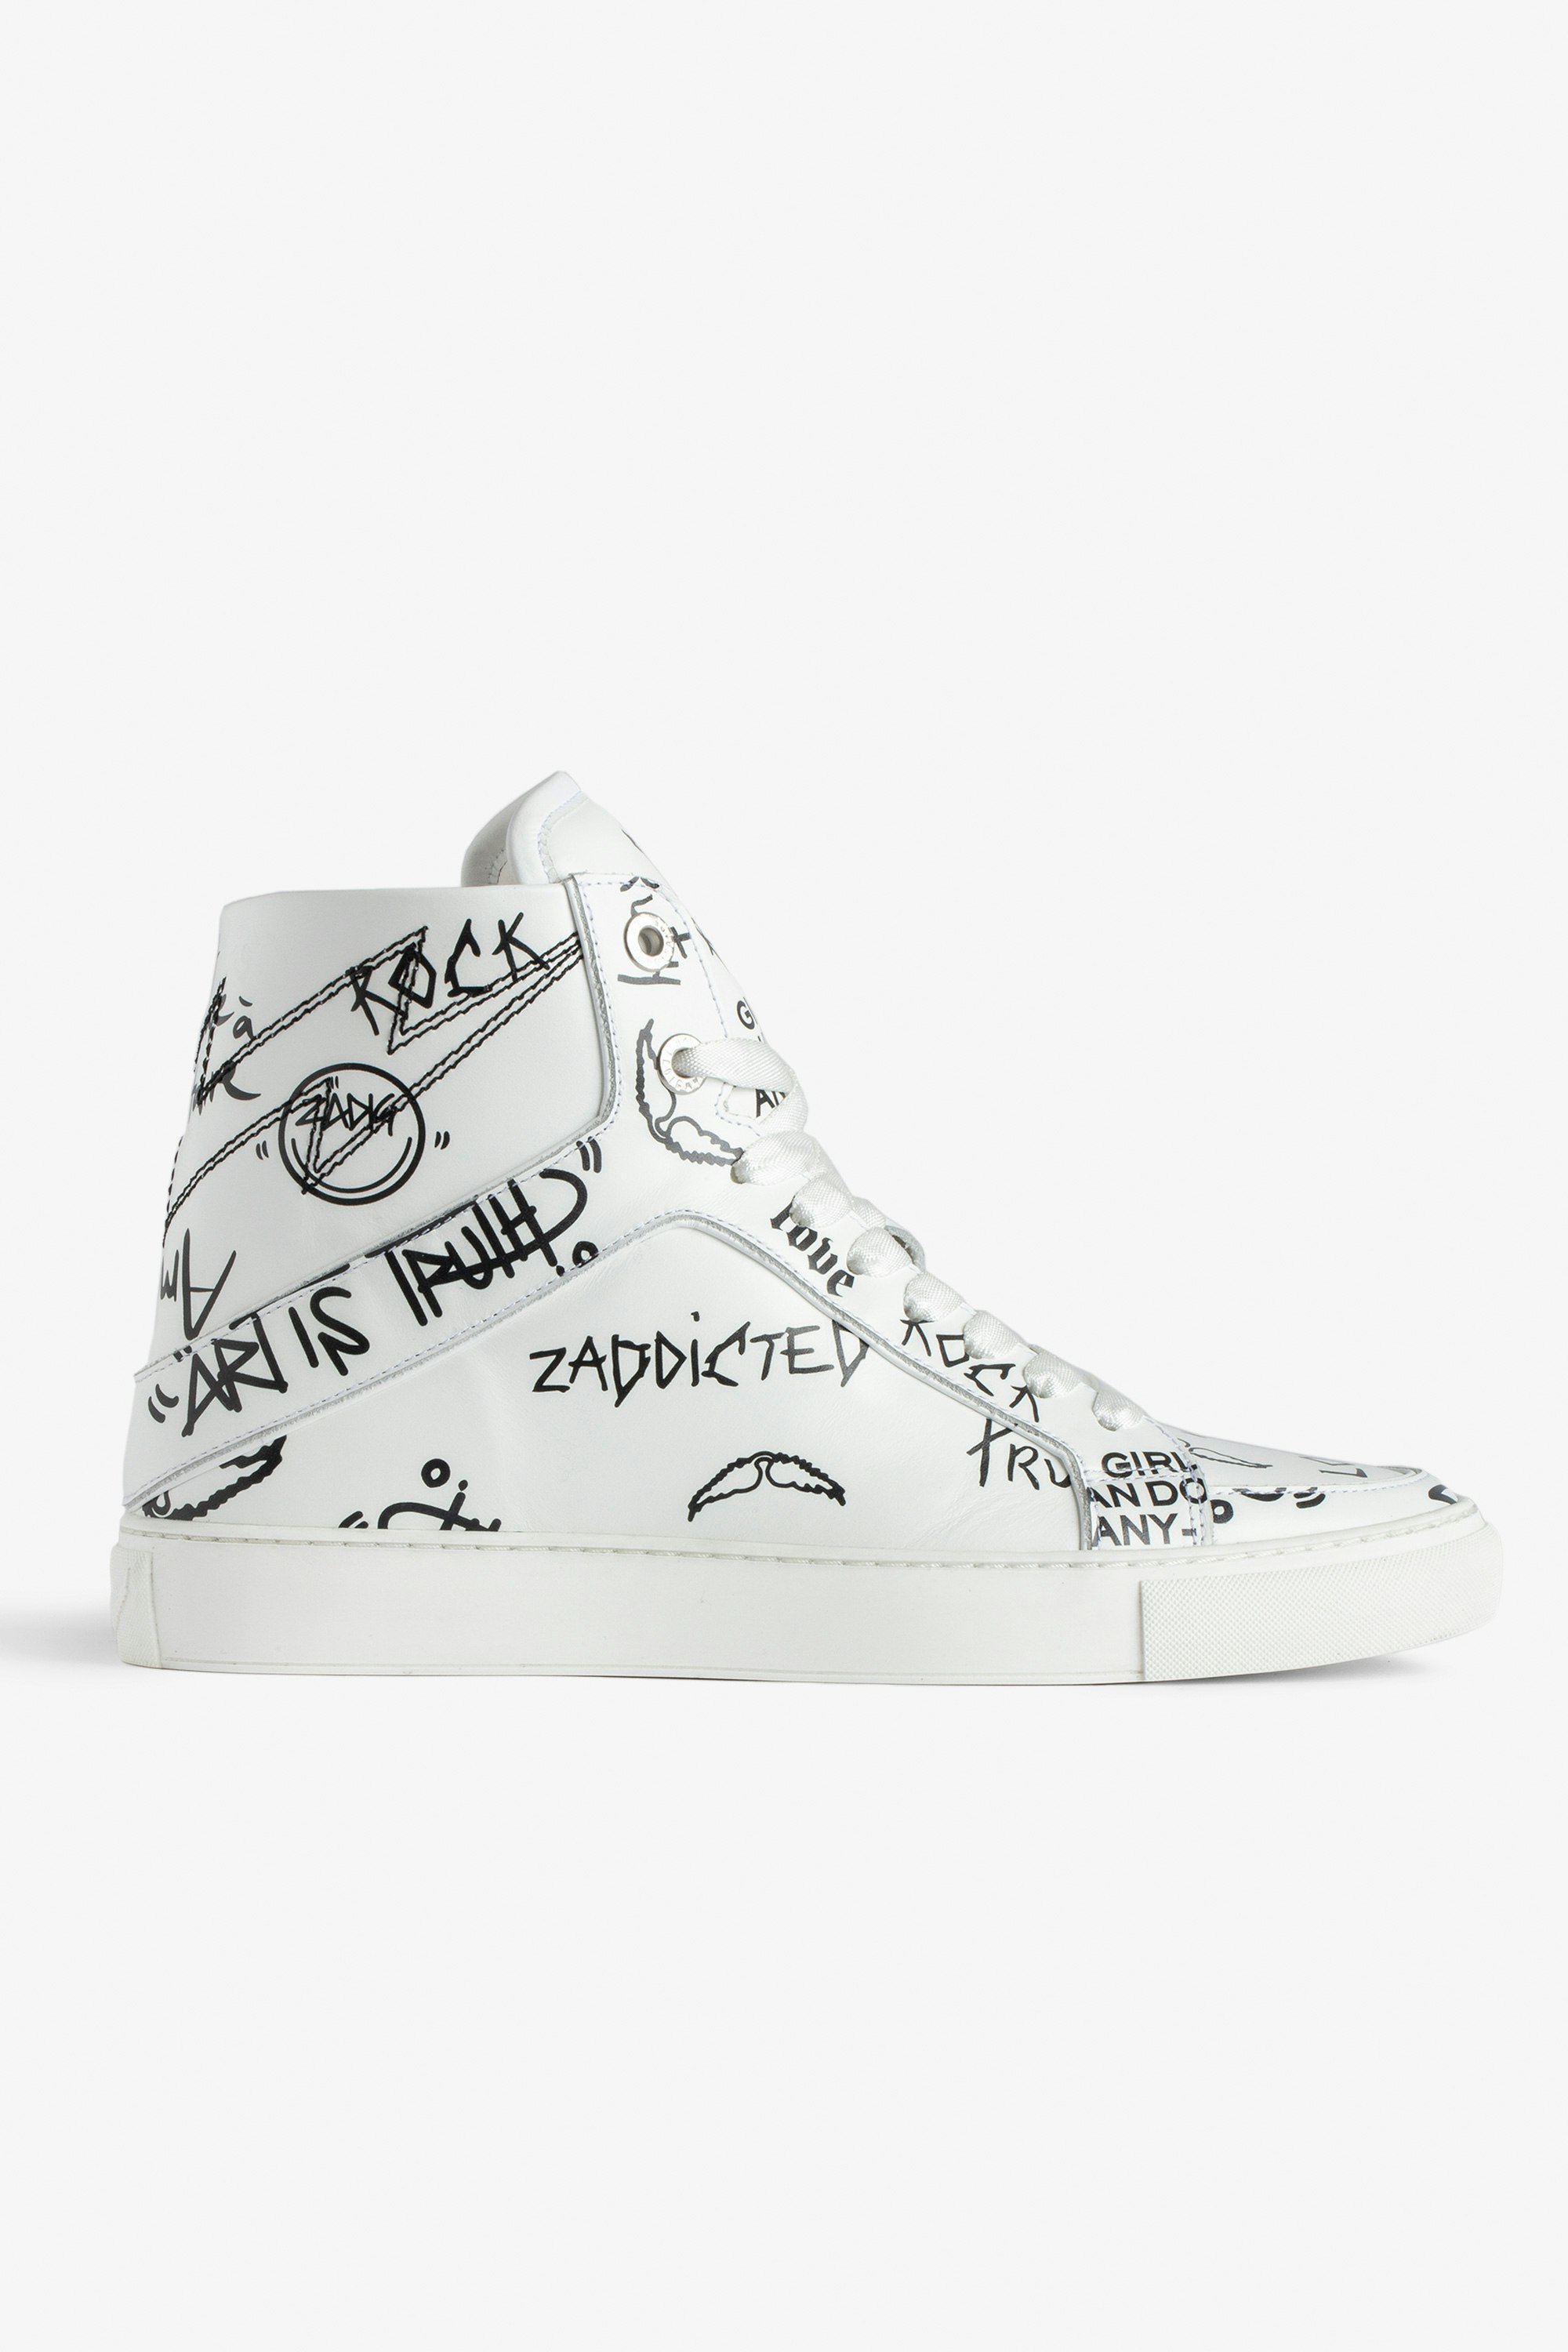 ZV1747 High Flash High-Top Trainers - Women’s ecru smooth leather high-top trainers with lightning bolt panels and graffiti.